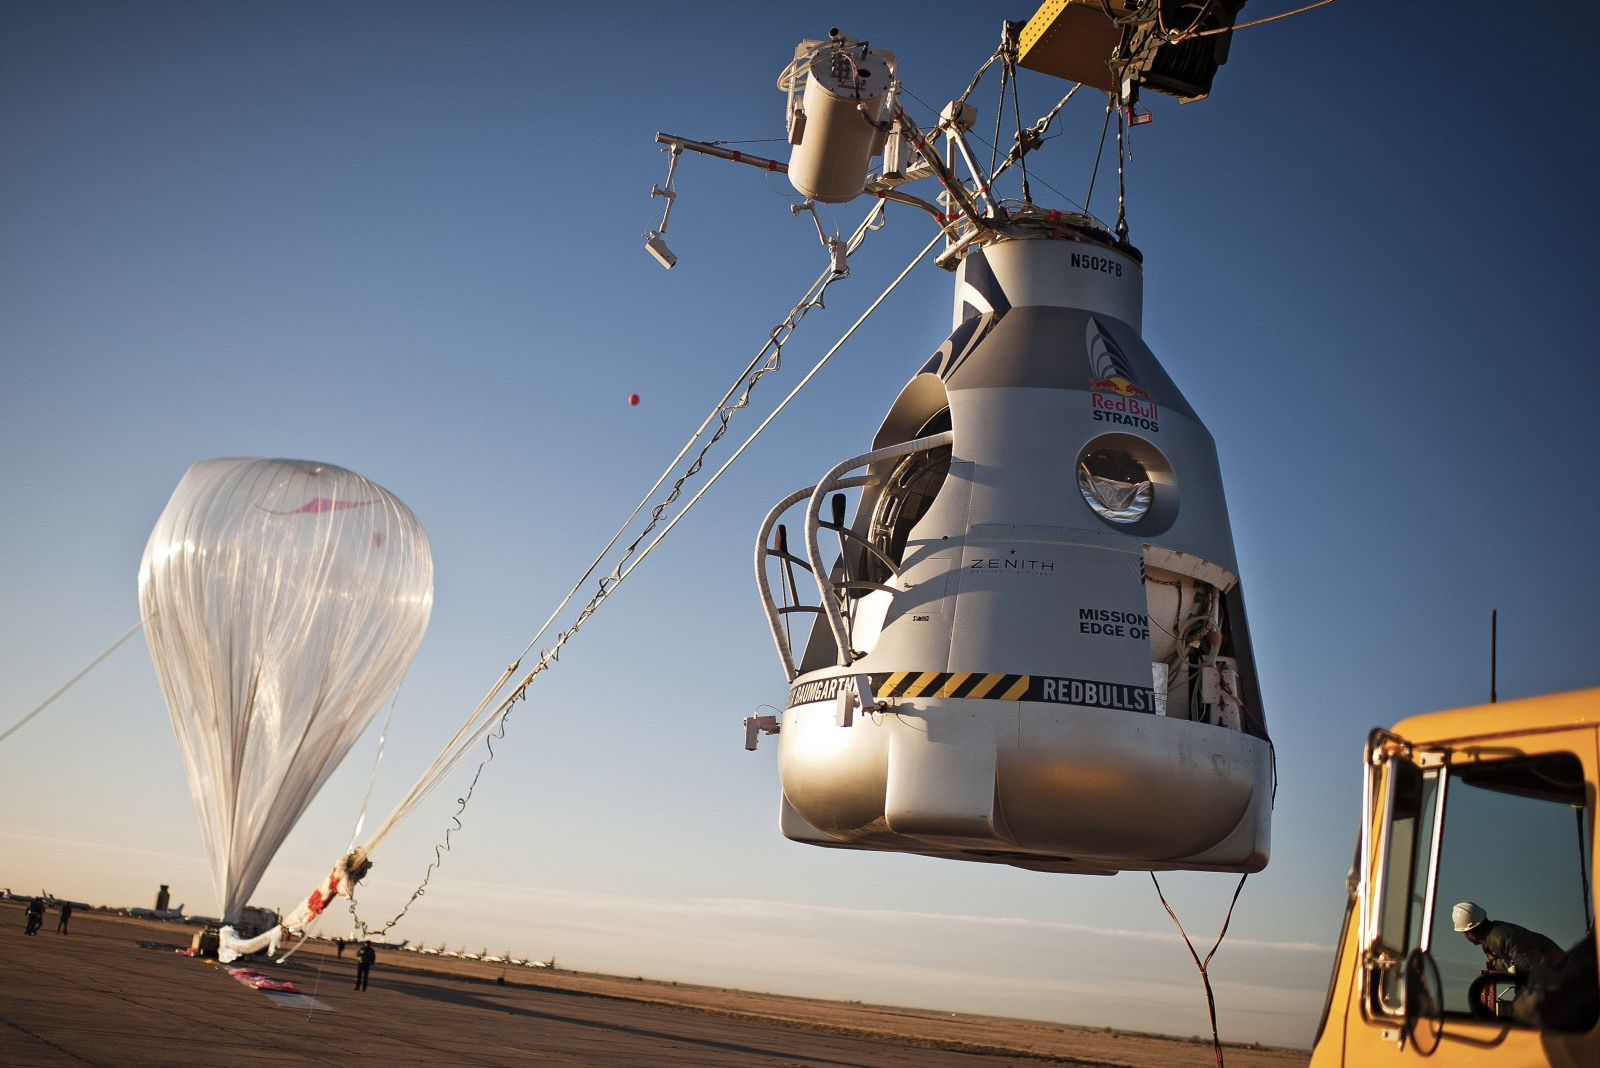 Balloon and capsule - Manned Flight One